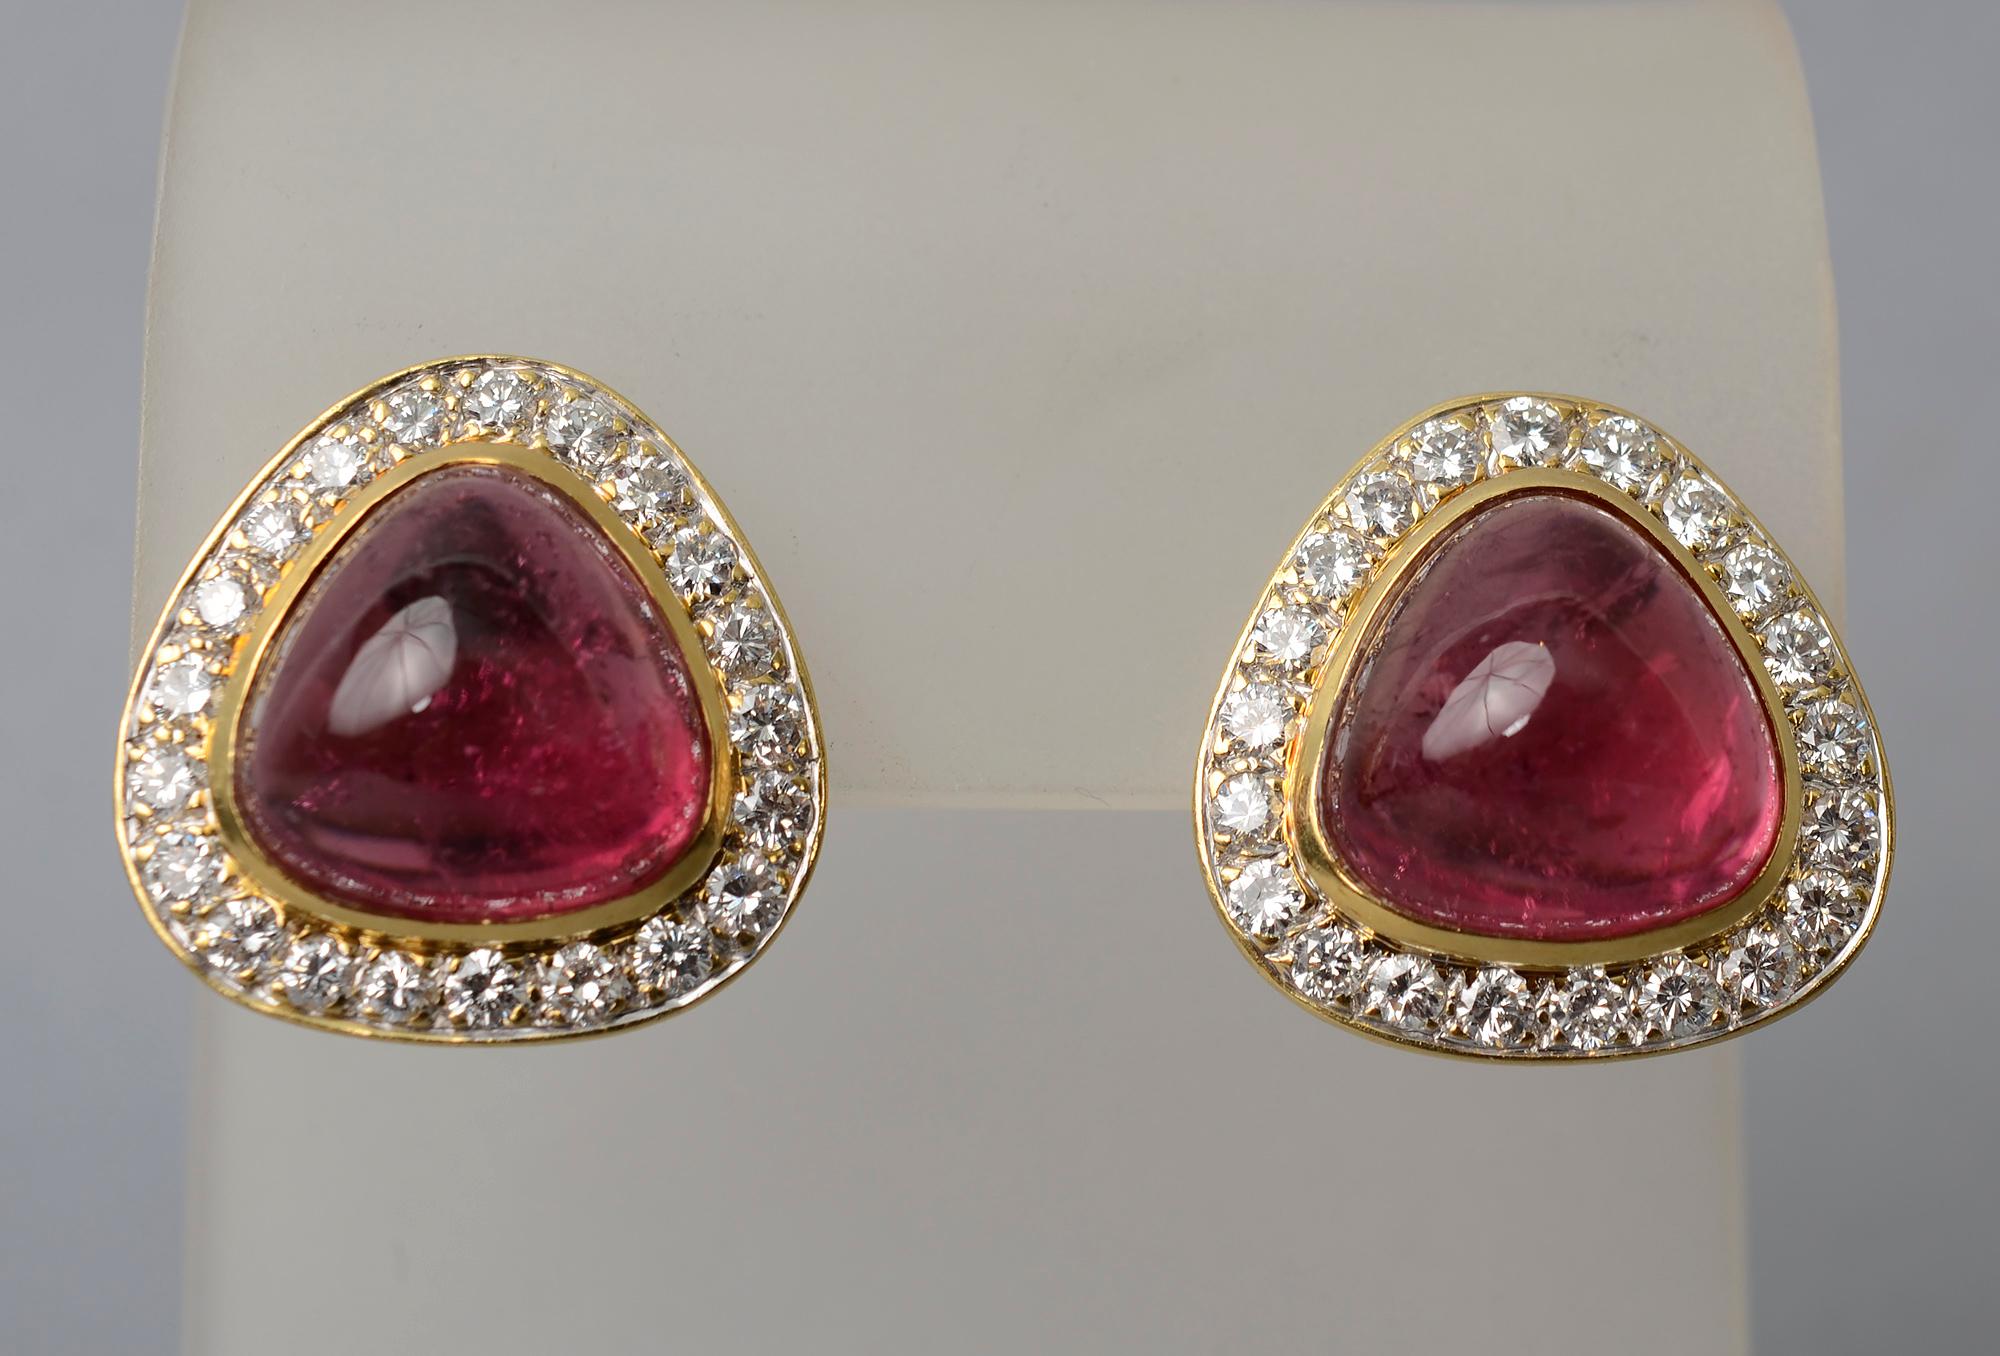 Triangle shaped tourmaline earrings surrounded by diamonds. The 18 karat gold earrings have approximately 2 carats of VS diamonds. The earrings are 3/4